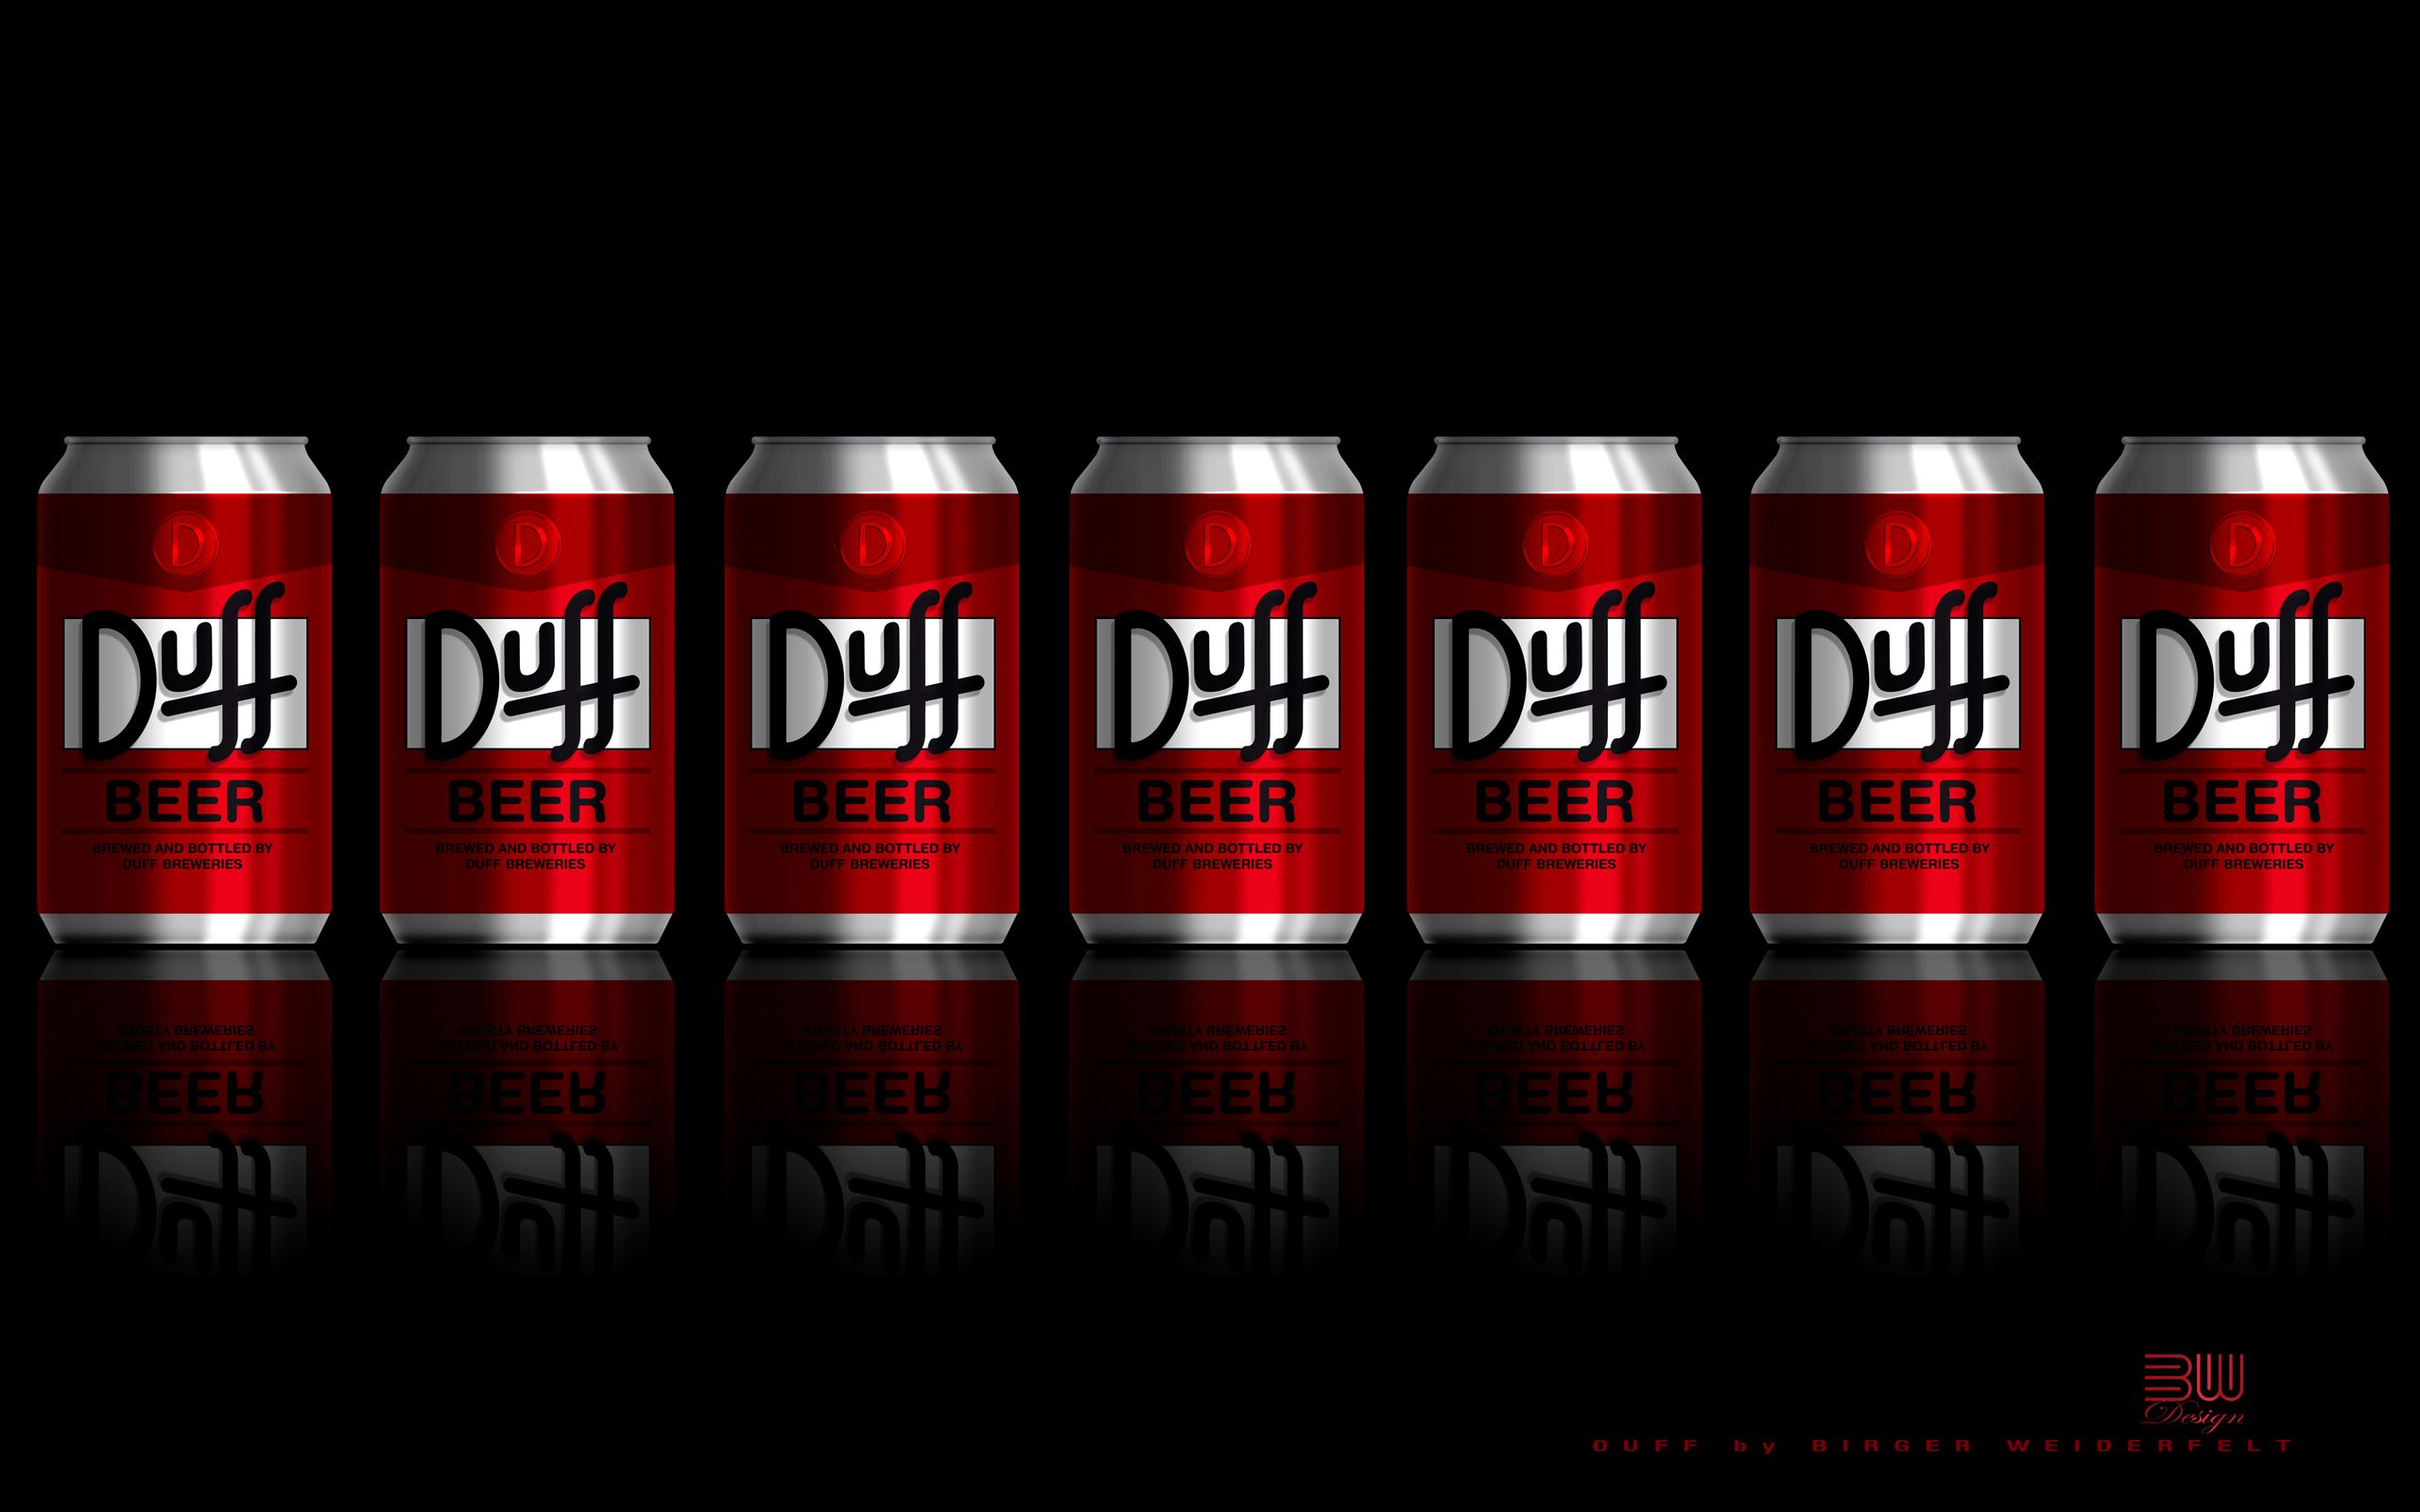 seven duff beer cans wallpapers55com   Best Wallpapers for PCs